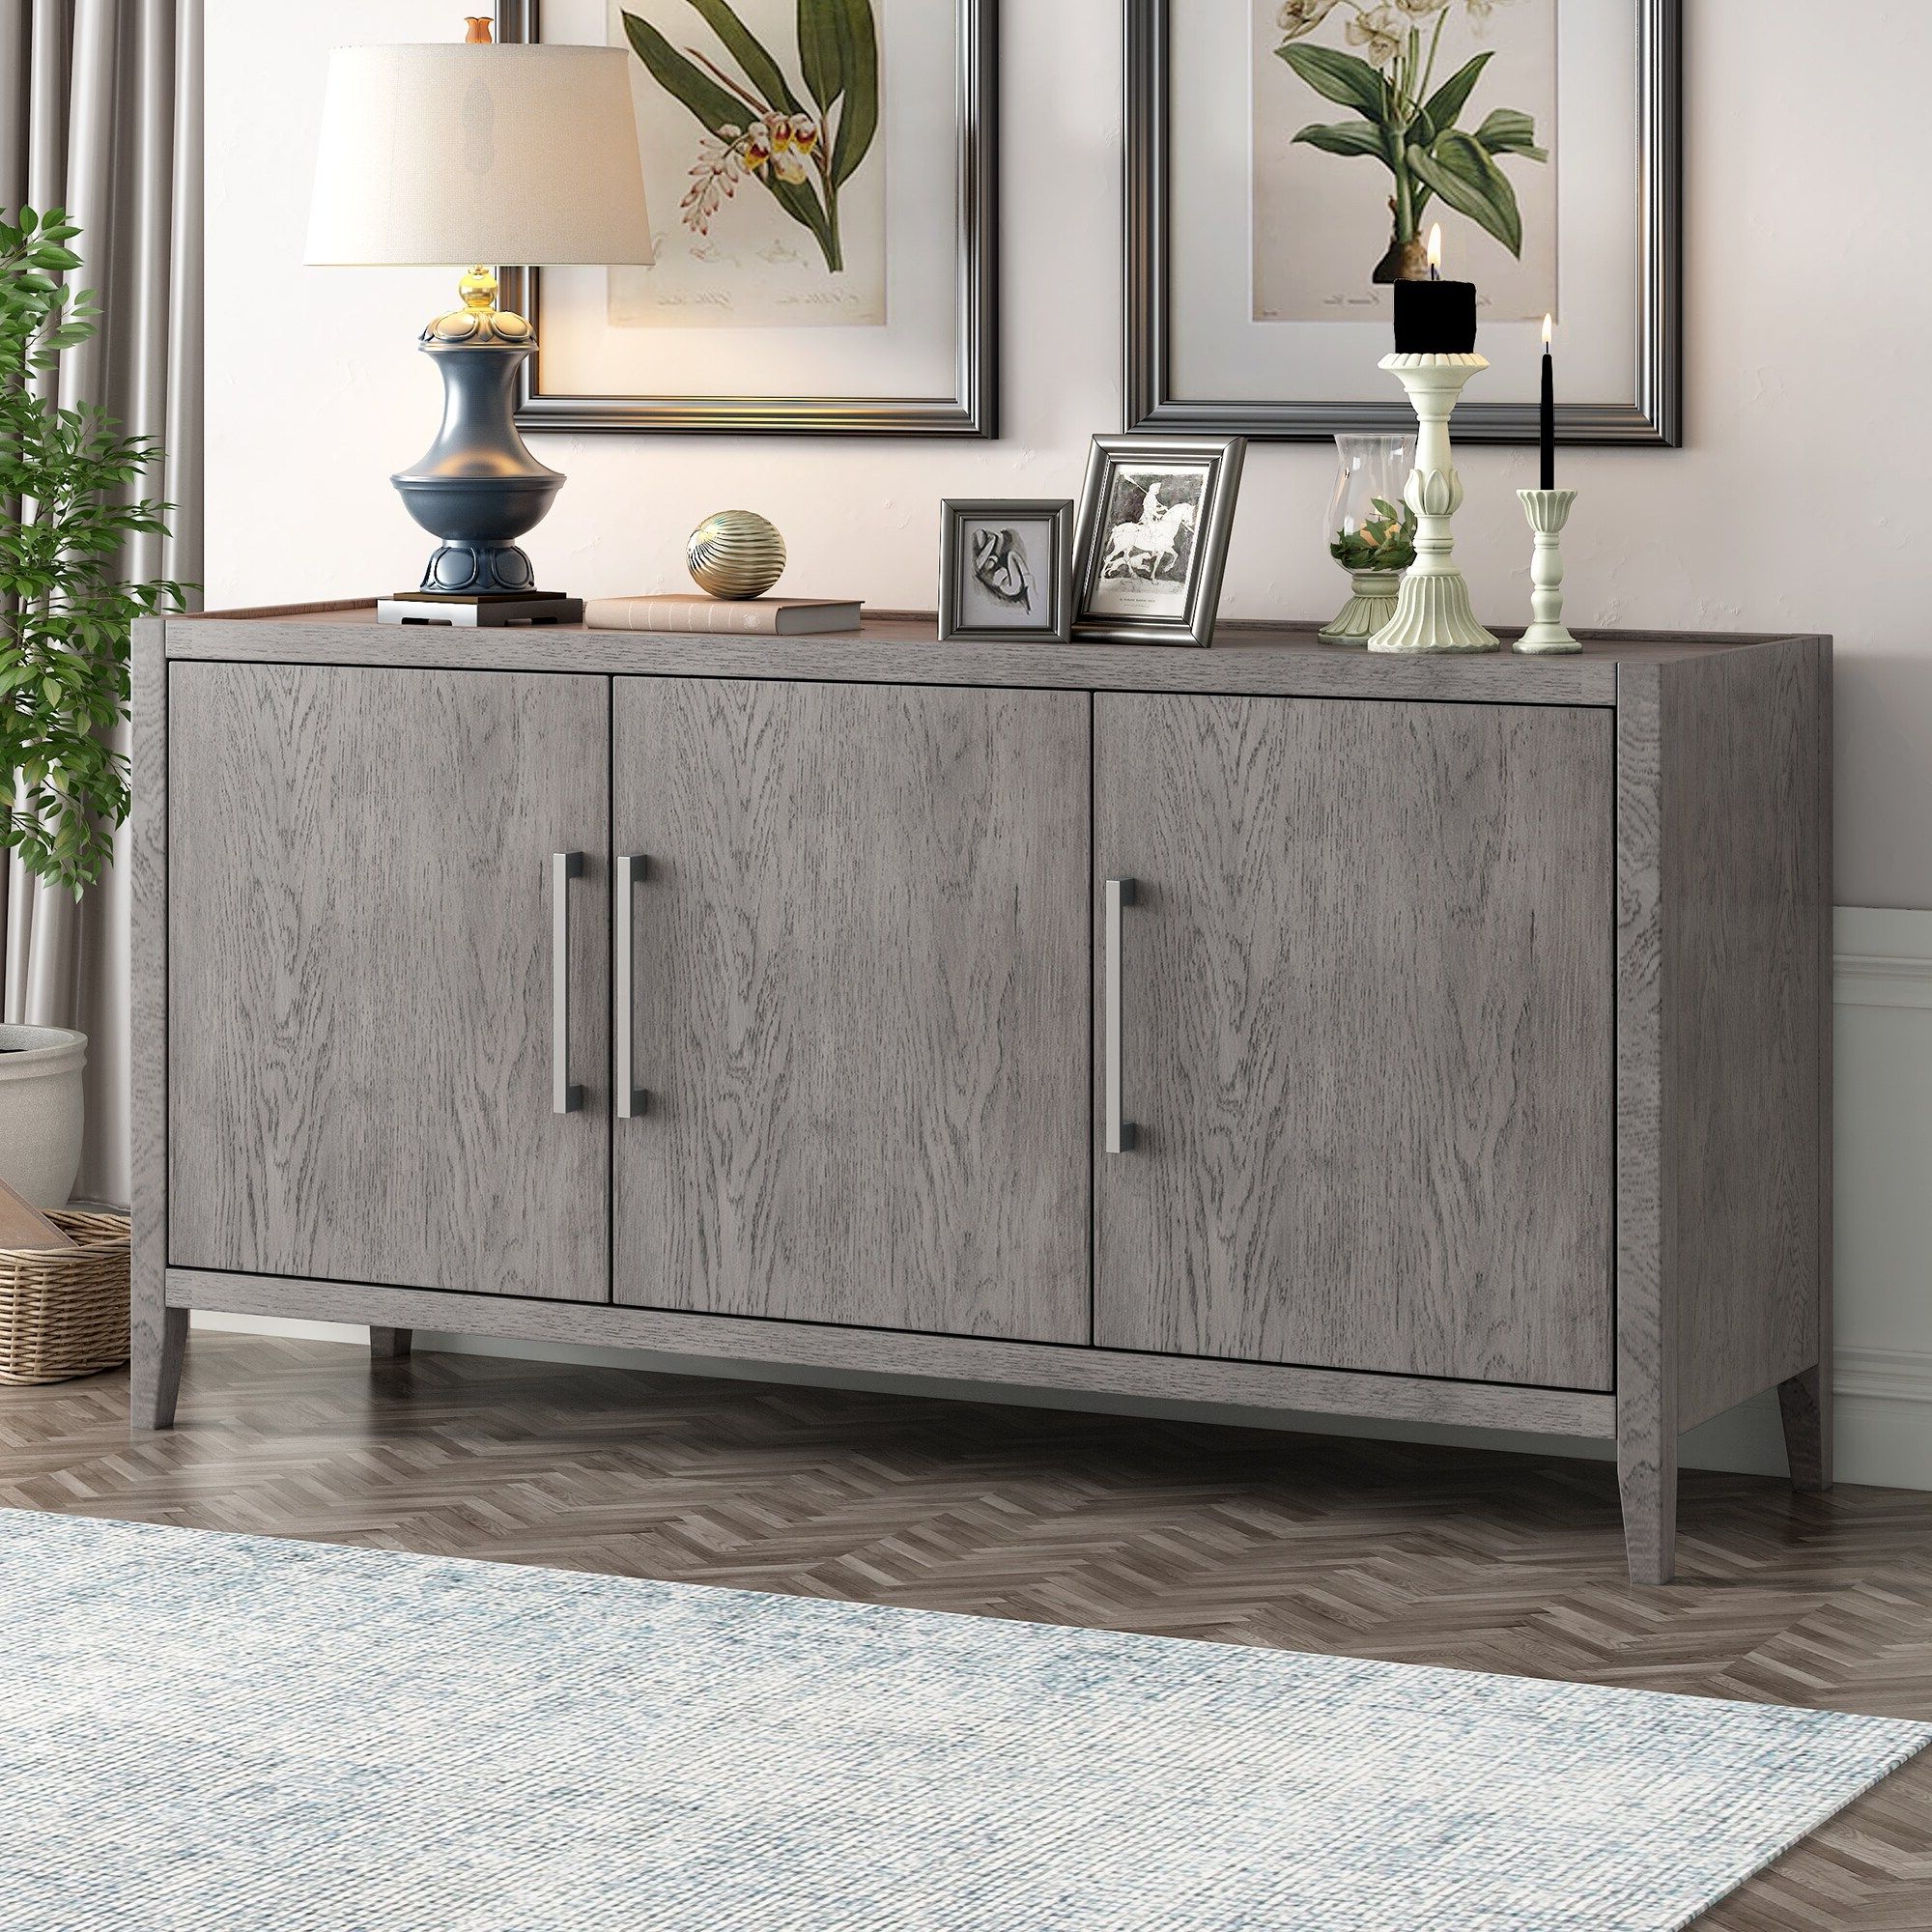 Most Recent Wooden Storage Cabinet Sideboard With 3 Doors And Adjustable Shelf – On  Sale – Bed Bath & Beyond – 37194726 With 3 Doors Sideboards Storage Cabinet (Photo 8 of 15)